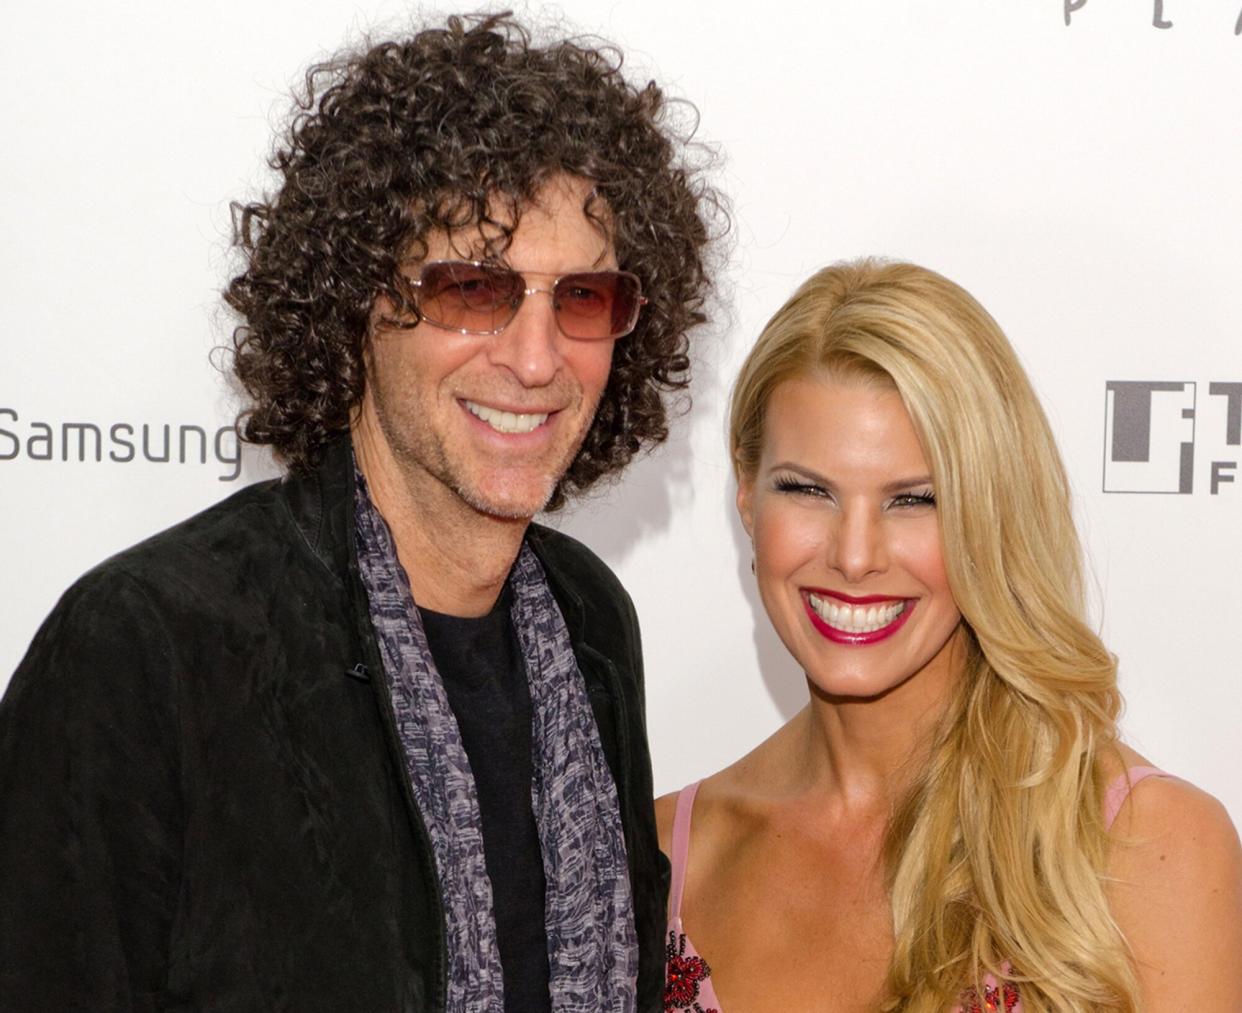 Howard Stern and Beth Stern attend the Tribeca Teaches benefit screening of "Silver Linings Playbook" at the Ziegfeld Theatre on November 12, 2012 in New York City